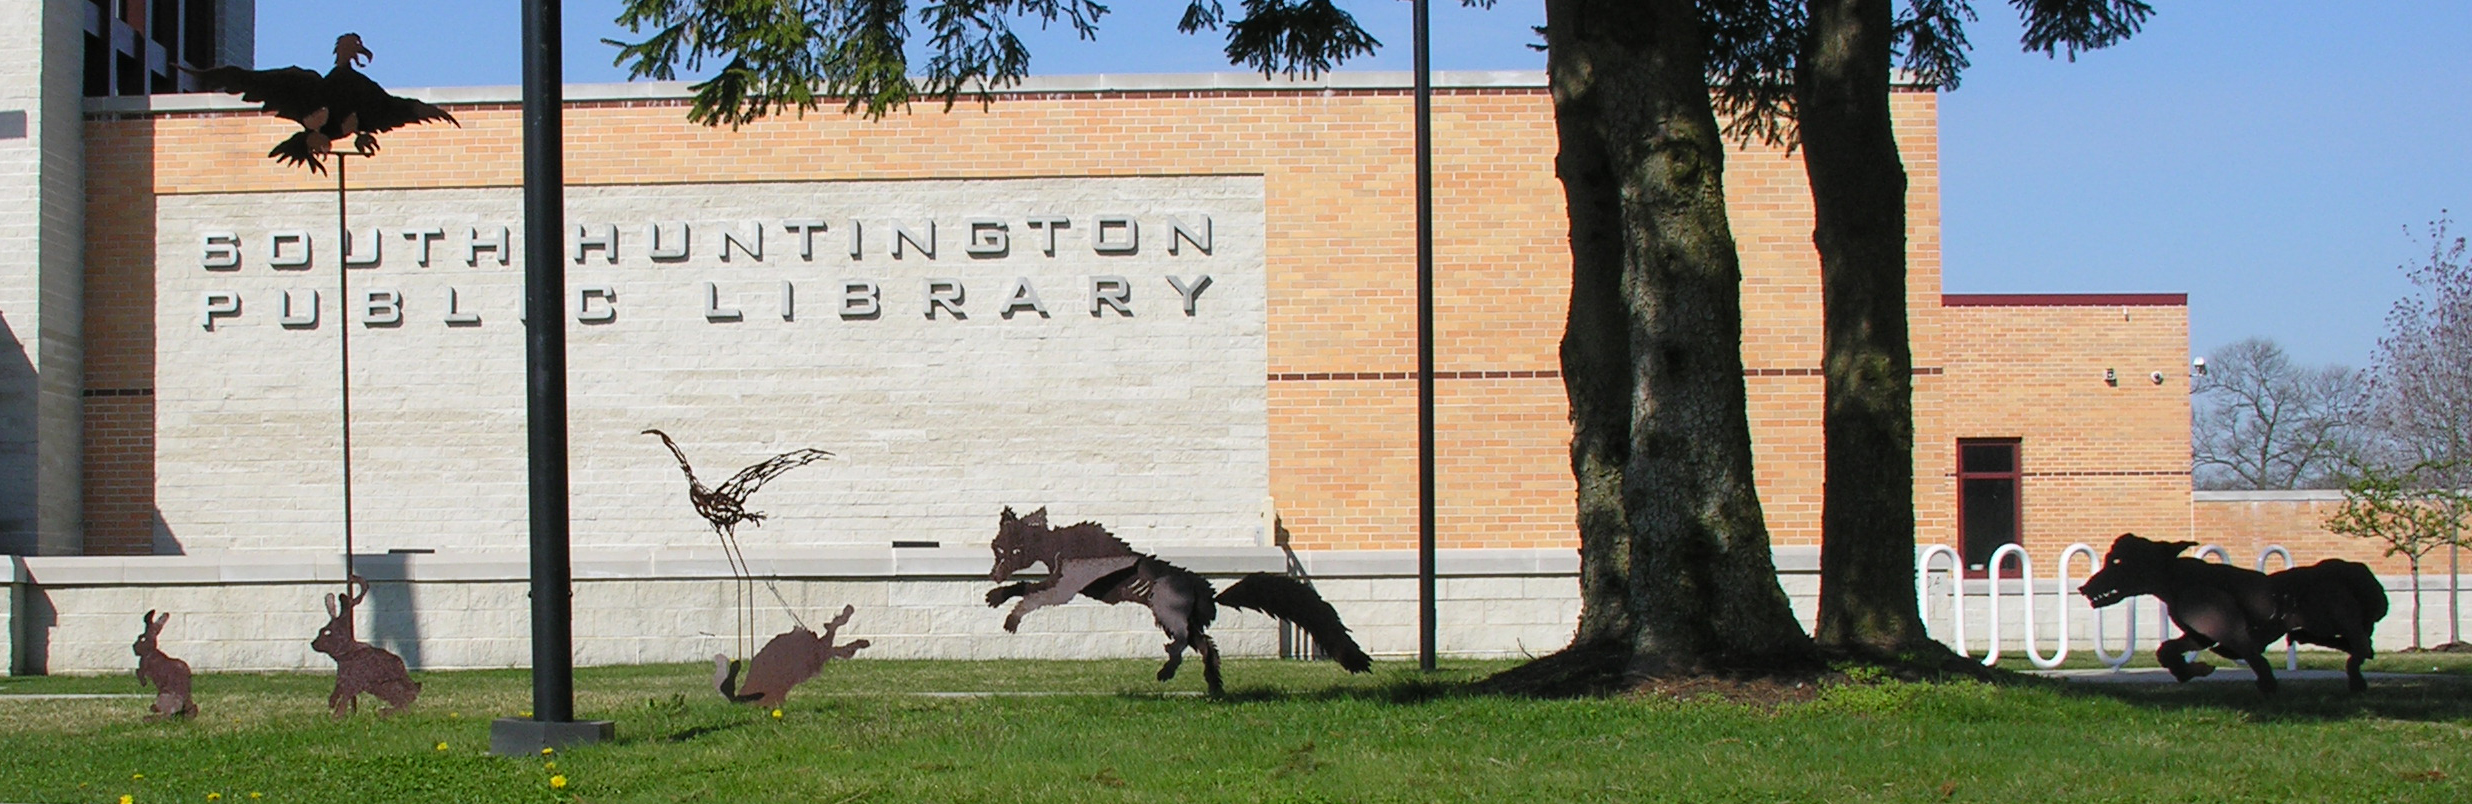 Steel fox chasing prey in front of South Huntington Public Library